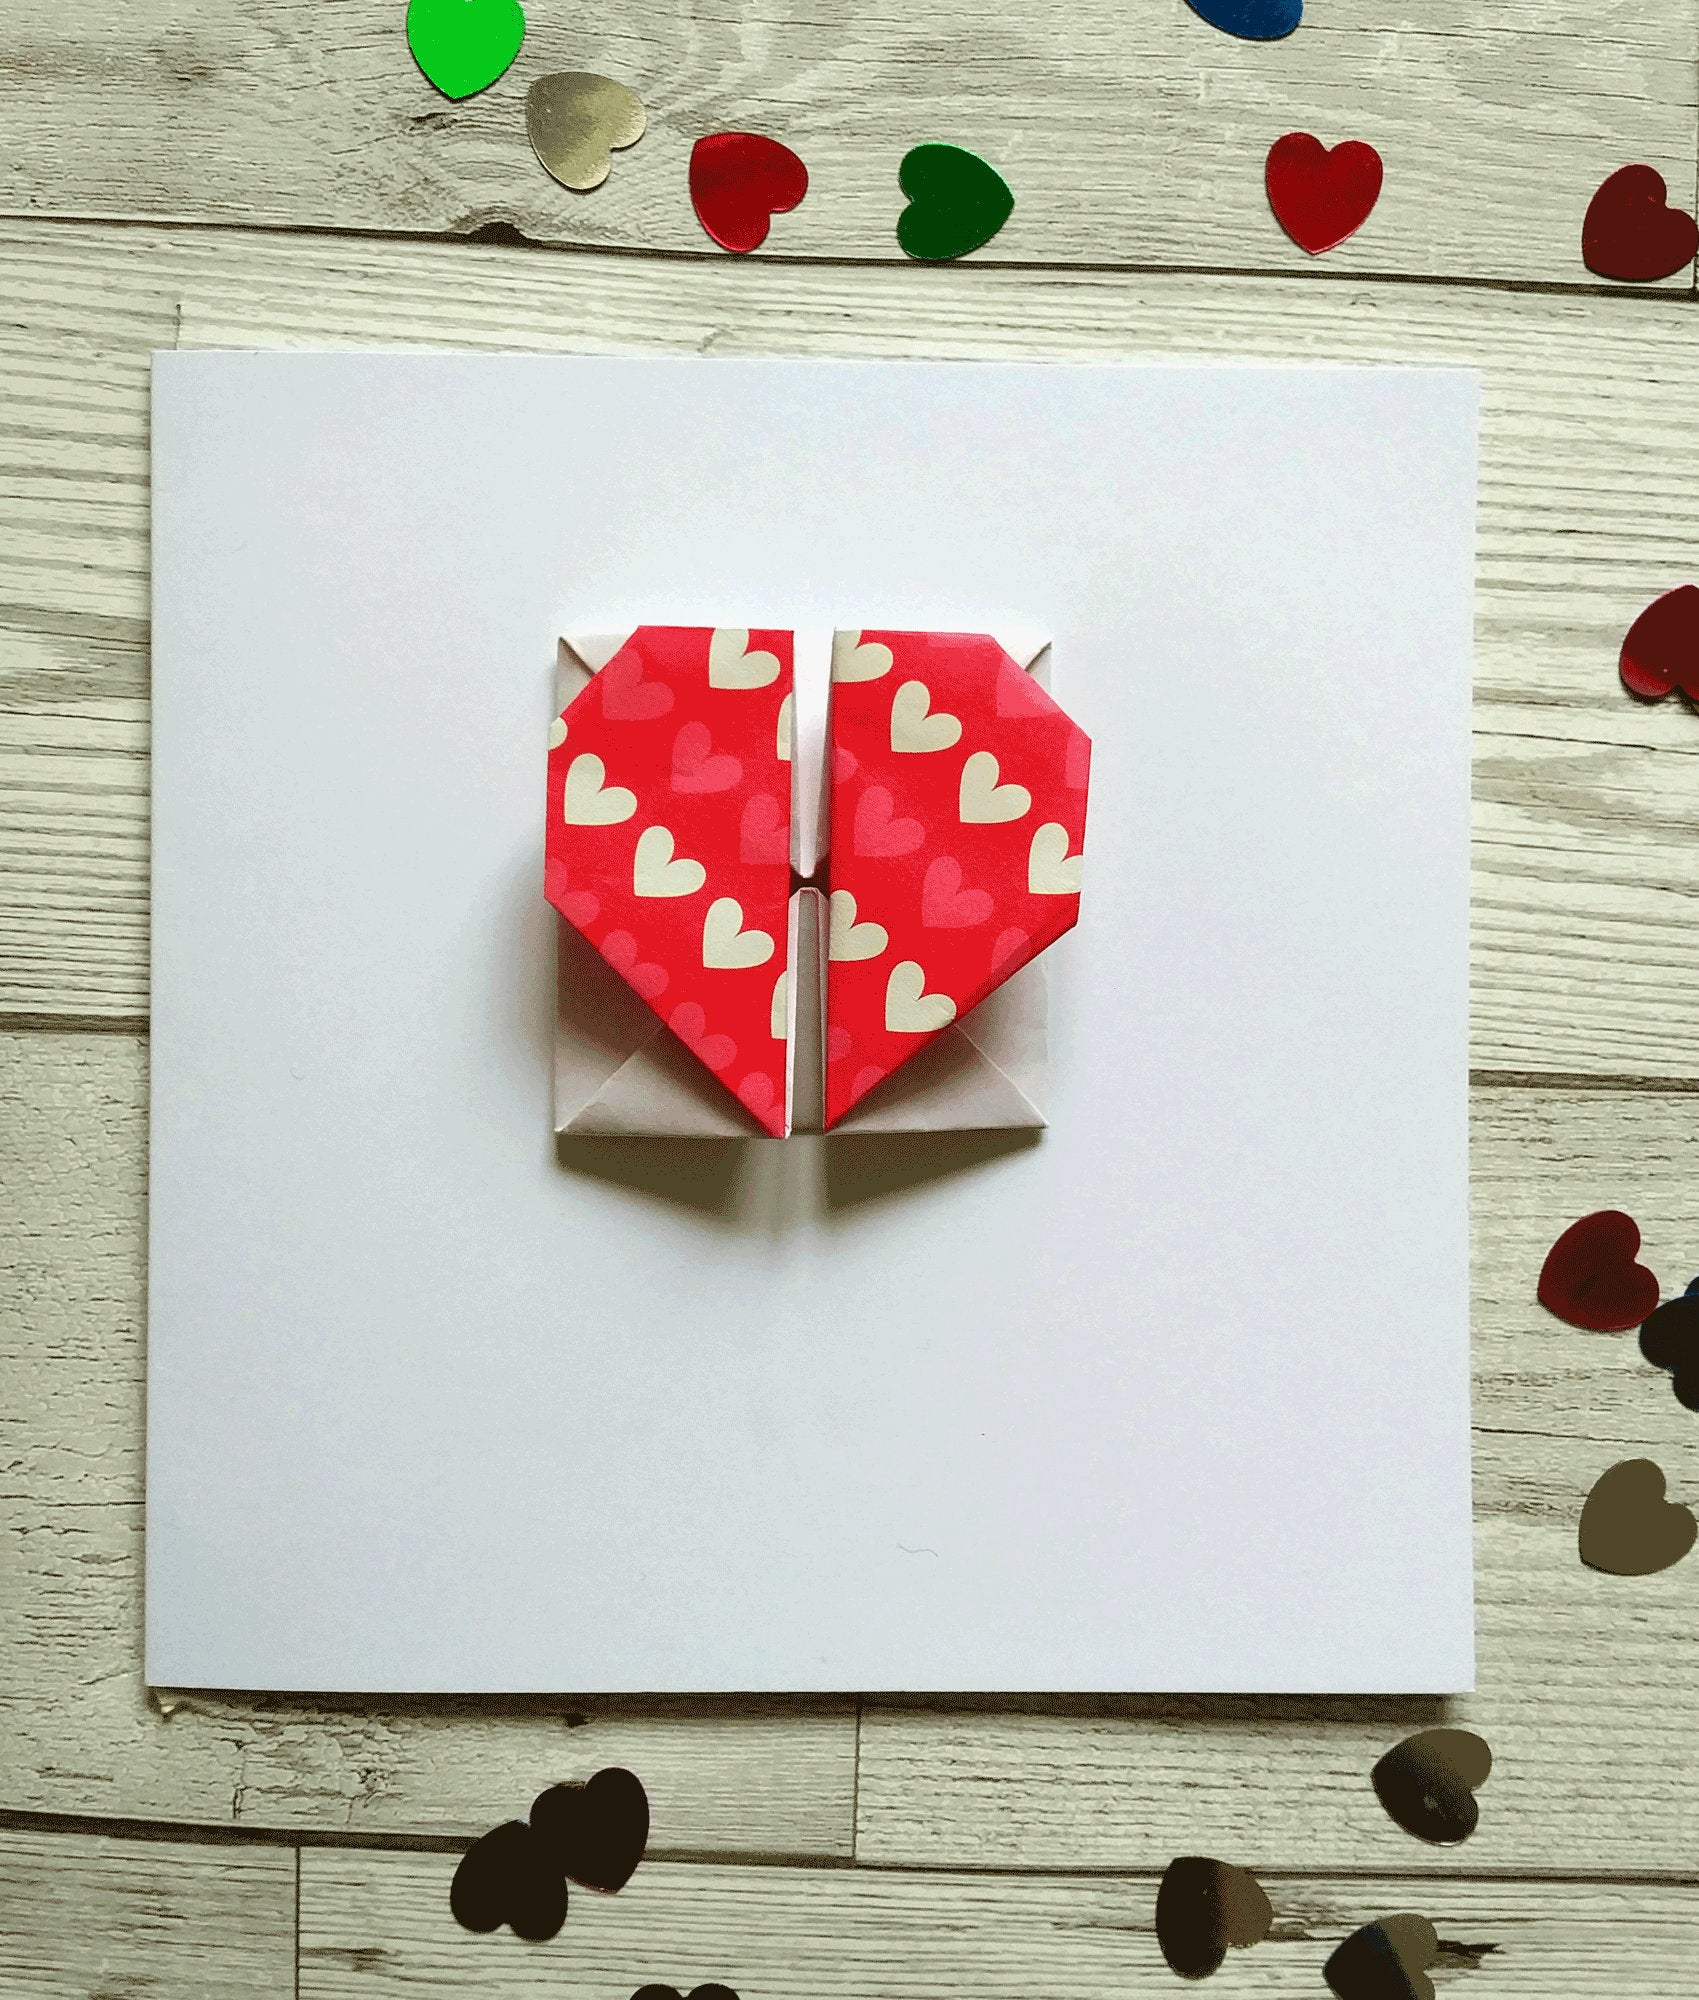 Origami Secret Heart Box Greetings Card Valentine Origami Heart Box Put Your Message Inside